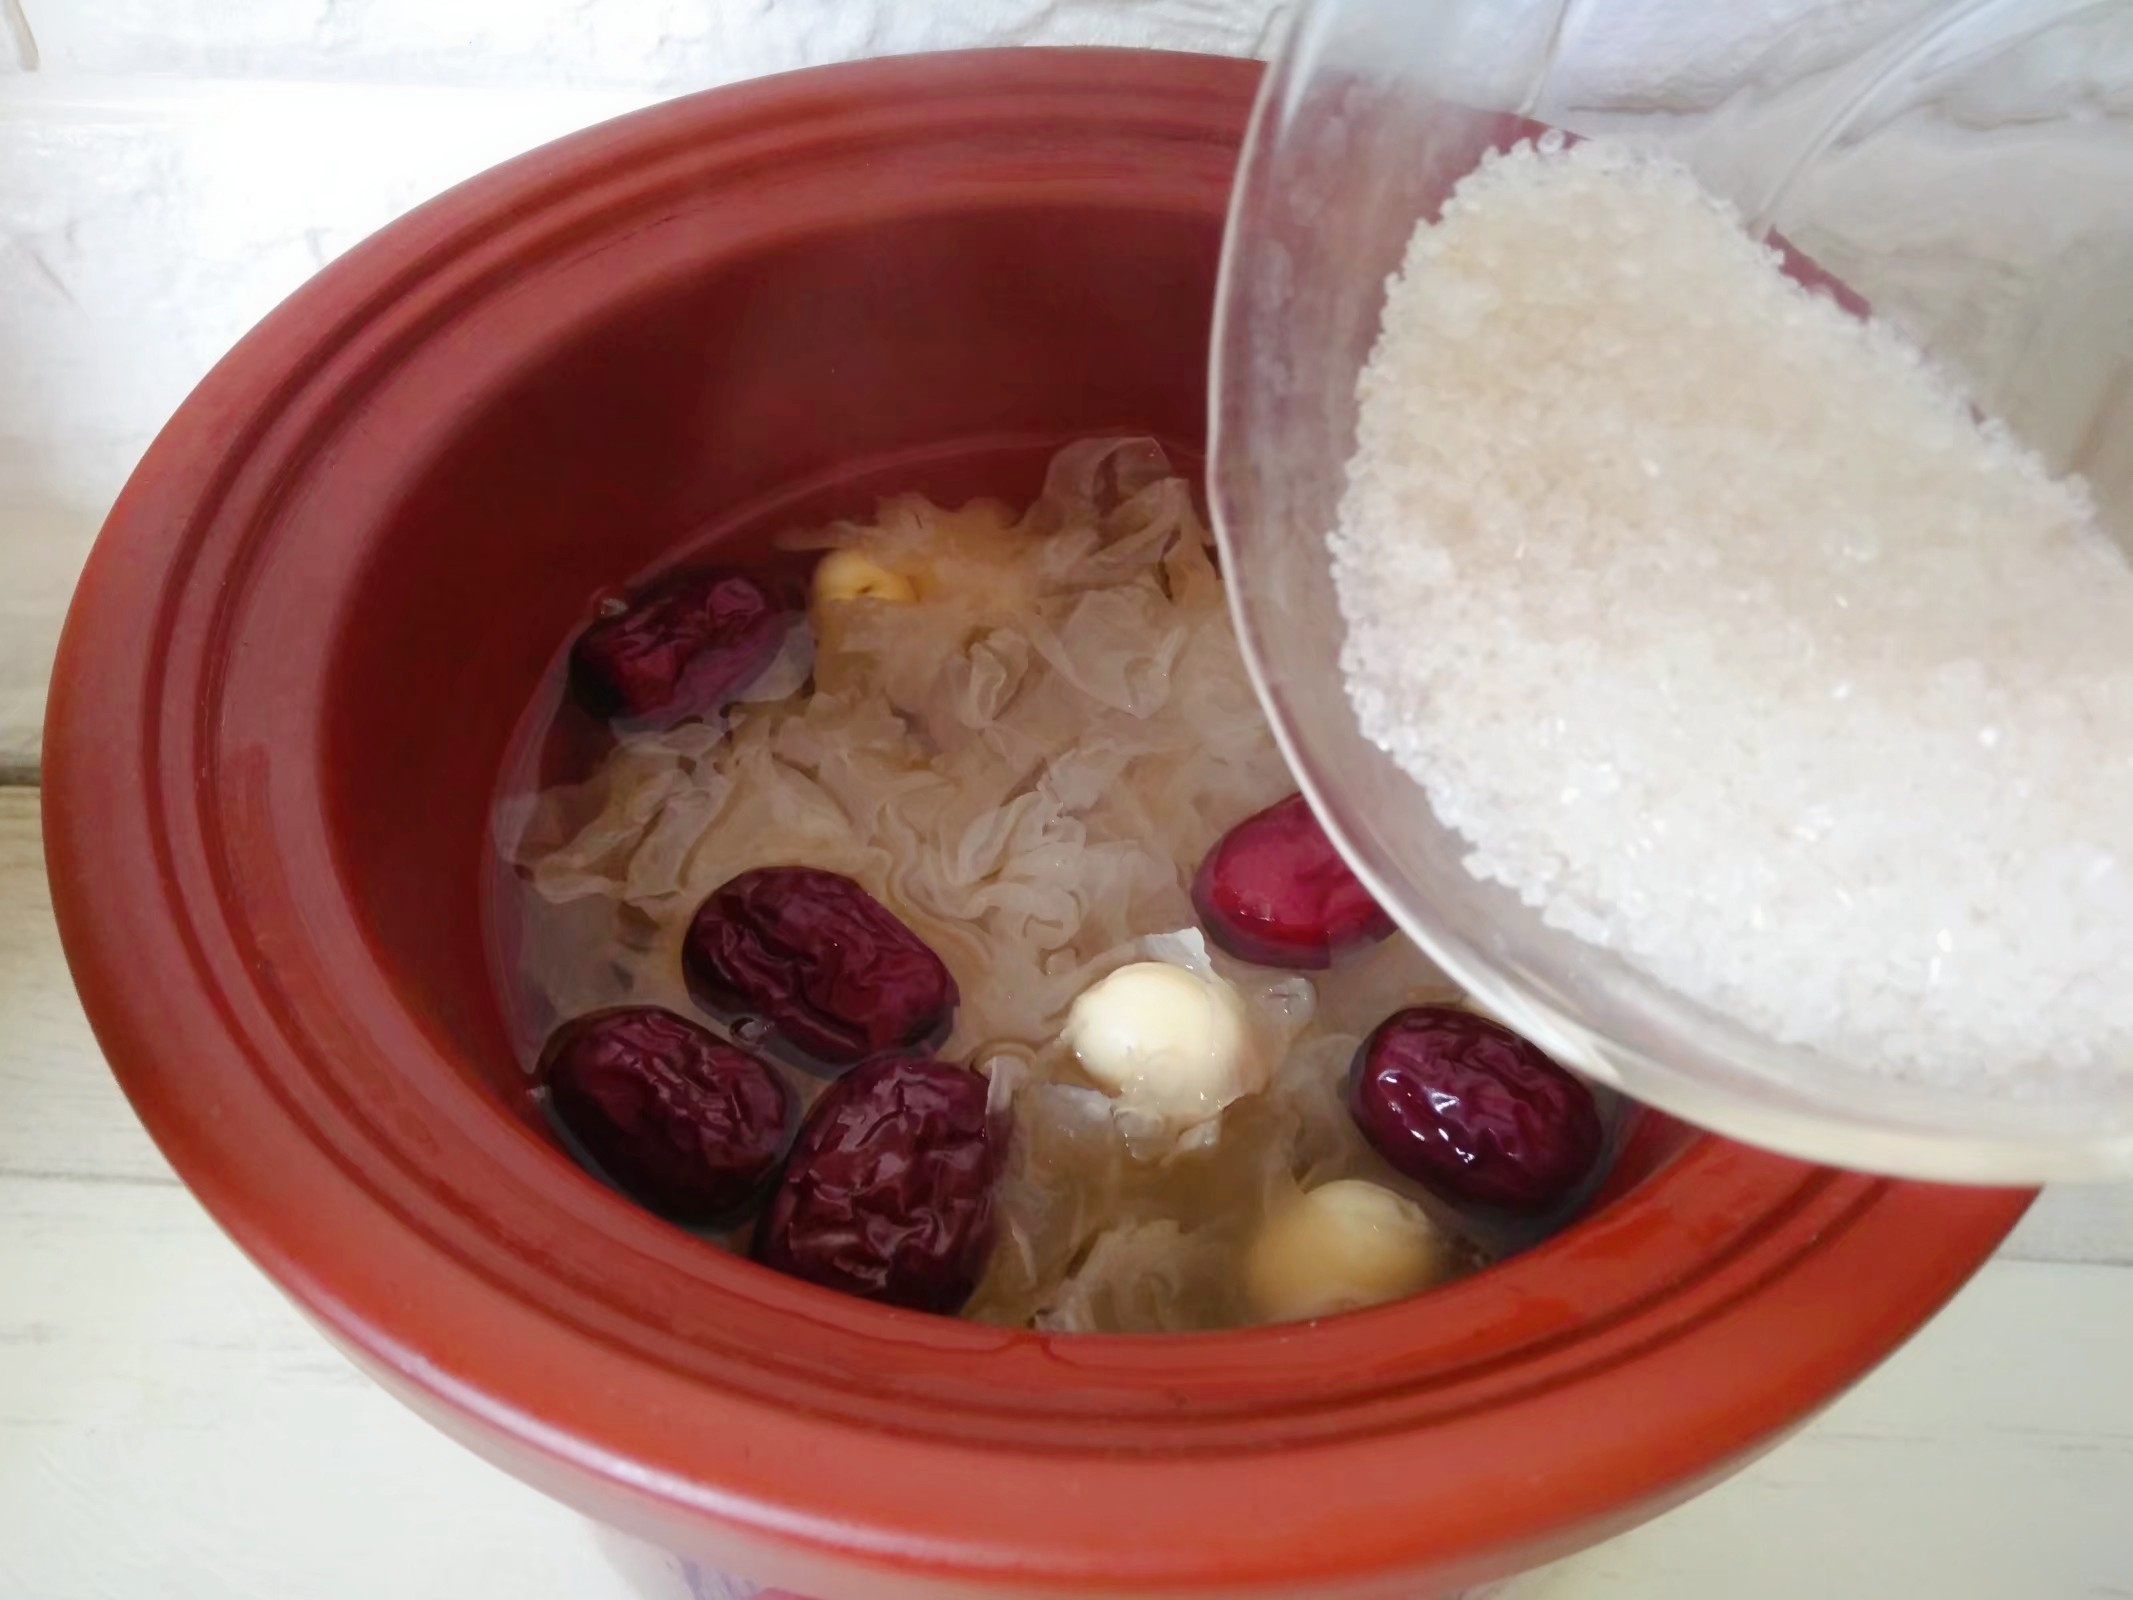 Red Date, Lotus Seed and Tremella Soup recipe